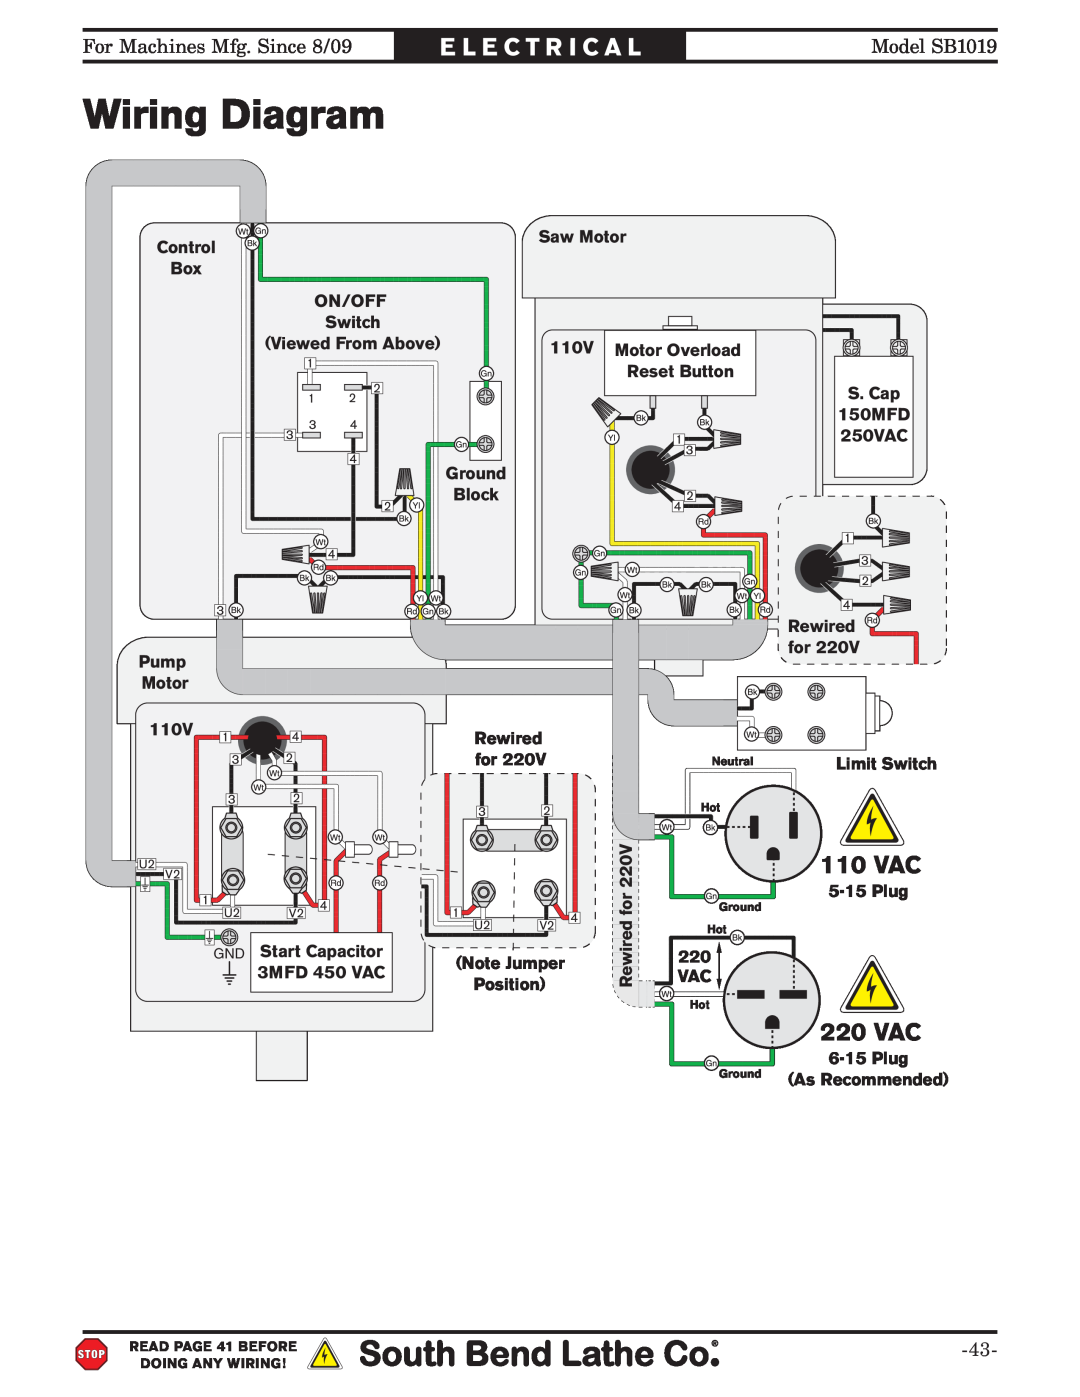 Southbend SB1019 Wiring Diagram, E L E C T R I C A L, 110 VAC, On/Off, 110V, Reset Button, S. Cap, 150MFD, 250VAC, Rewired 